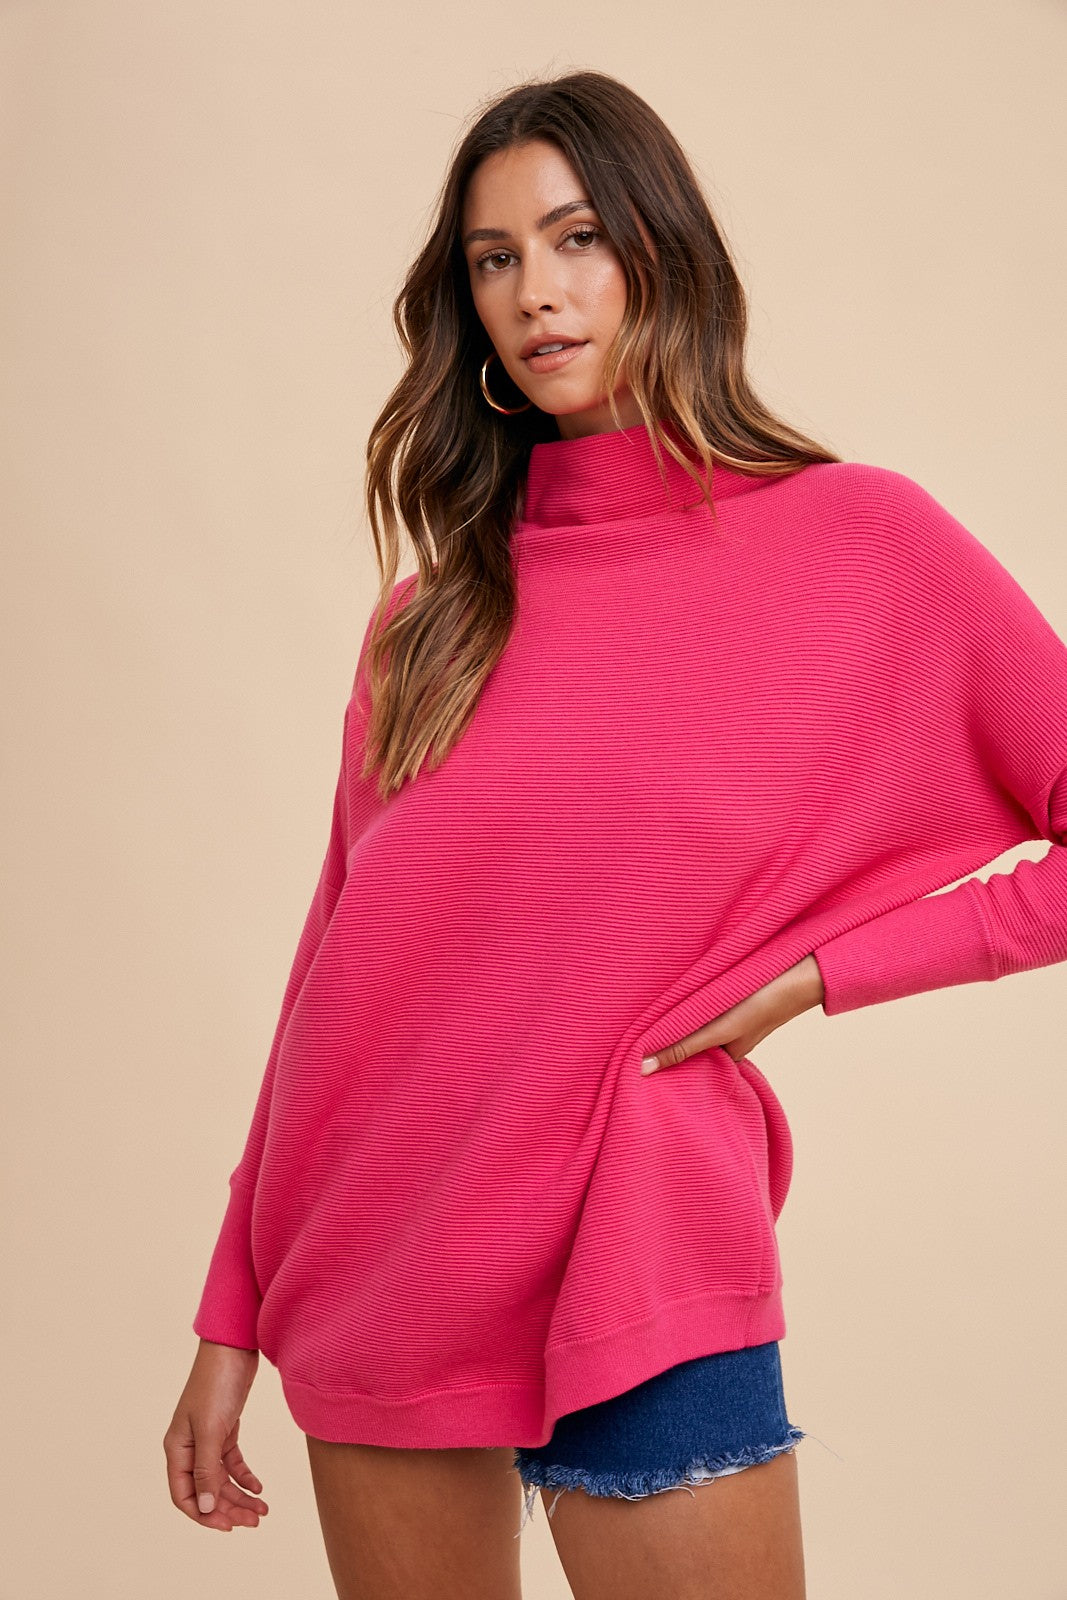 Hot Pink Oversized Fit Texture Sweater